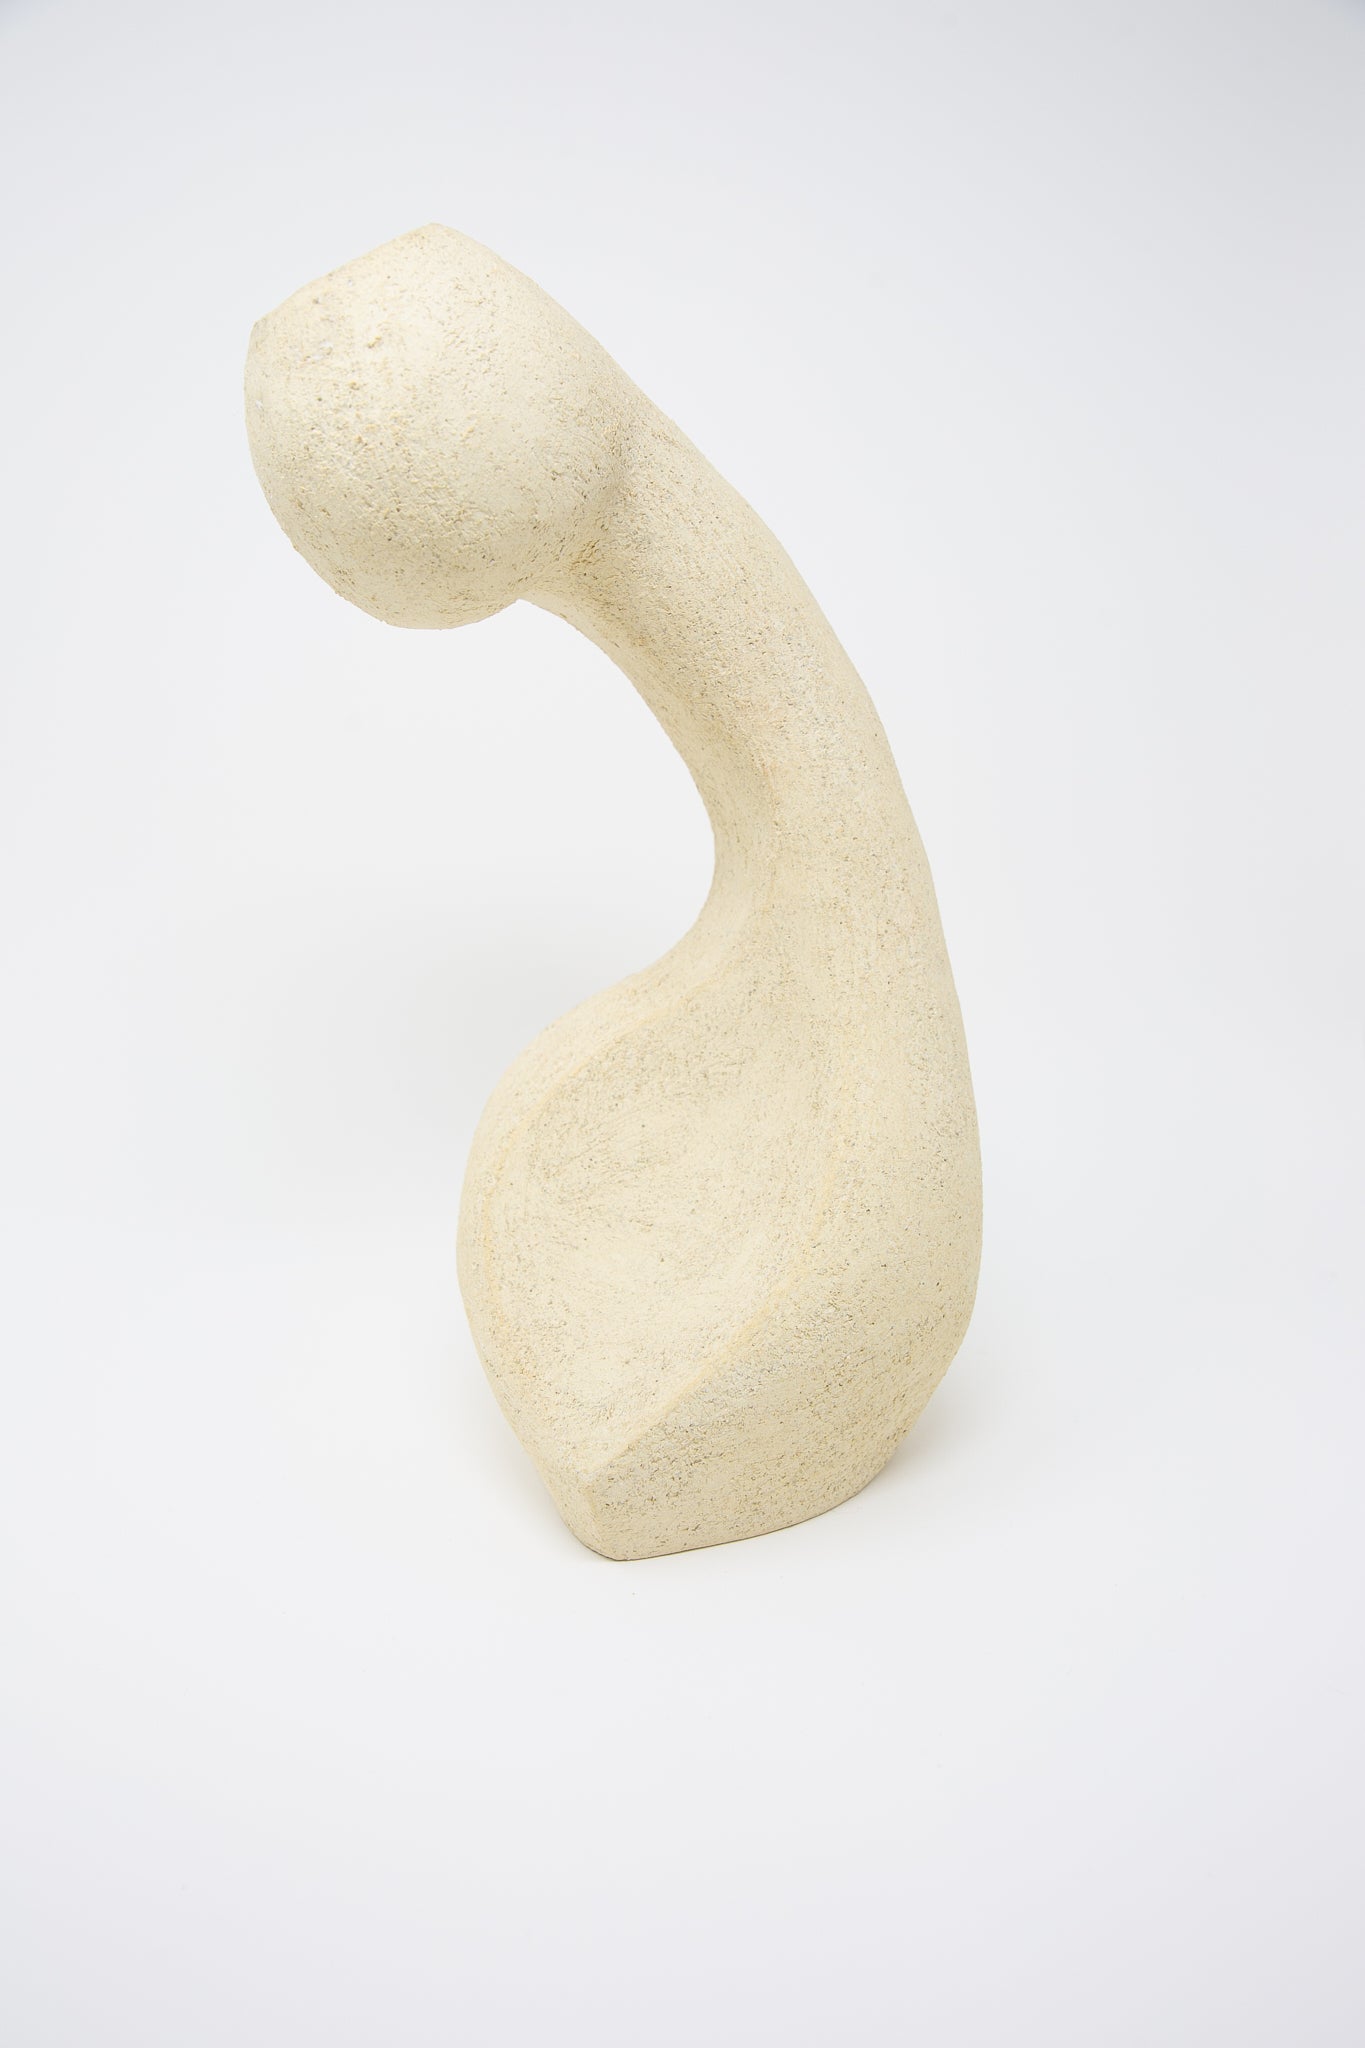 Abstract stone sculpture with a curved form crafted from Lost Quarry's Large Hand Built Vessel No. 000711 Bud Vase on a white background.